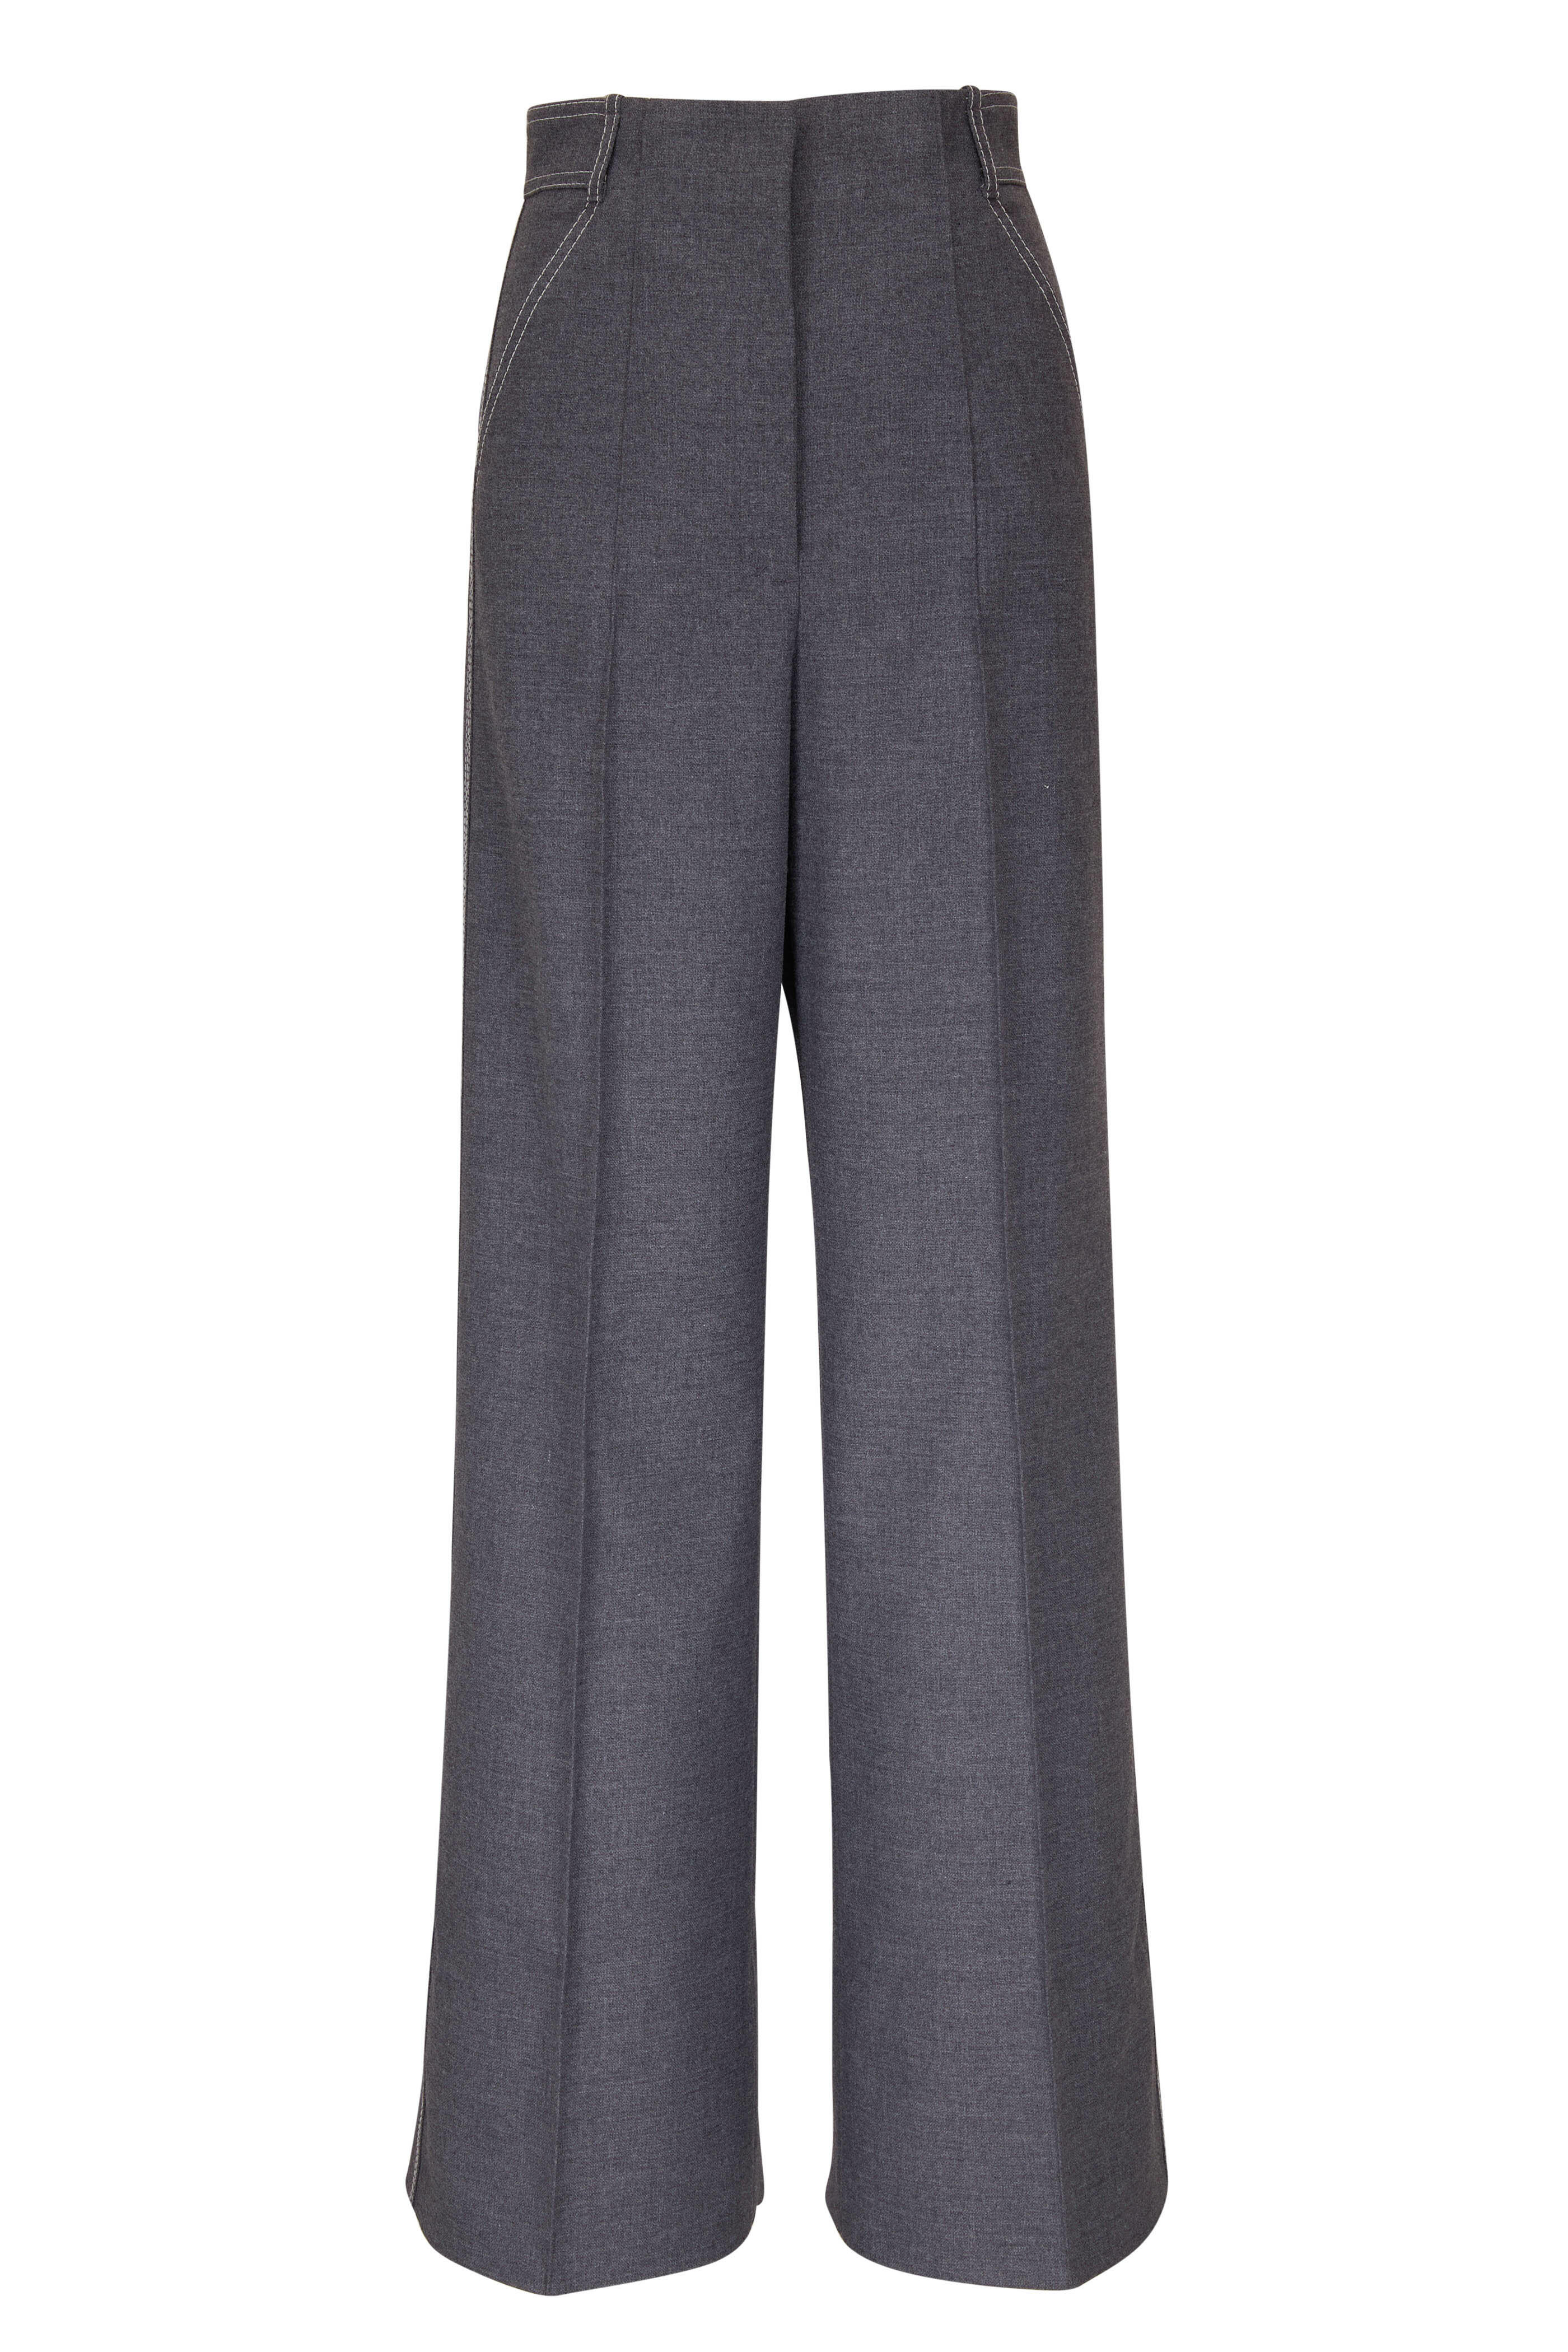 Dorothee Schumacher - Casual Attraction Charcoal Gray Pant